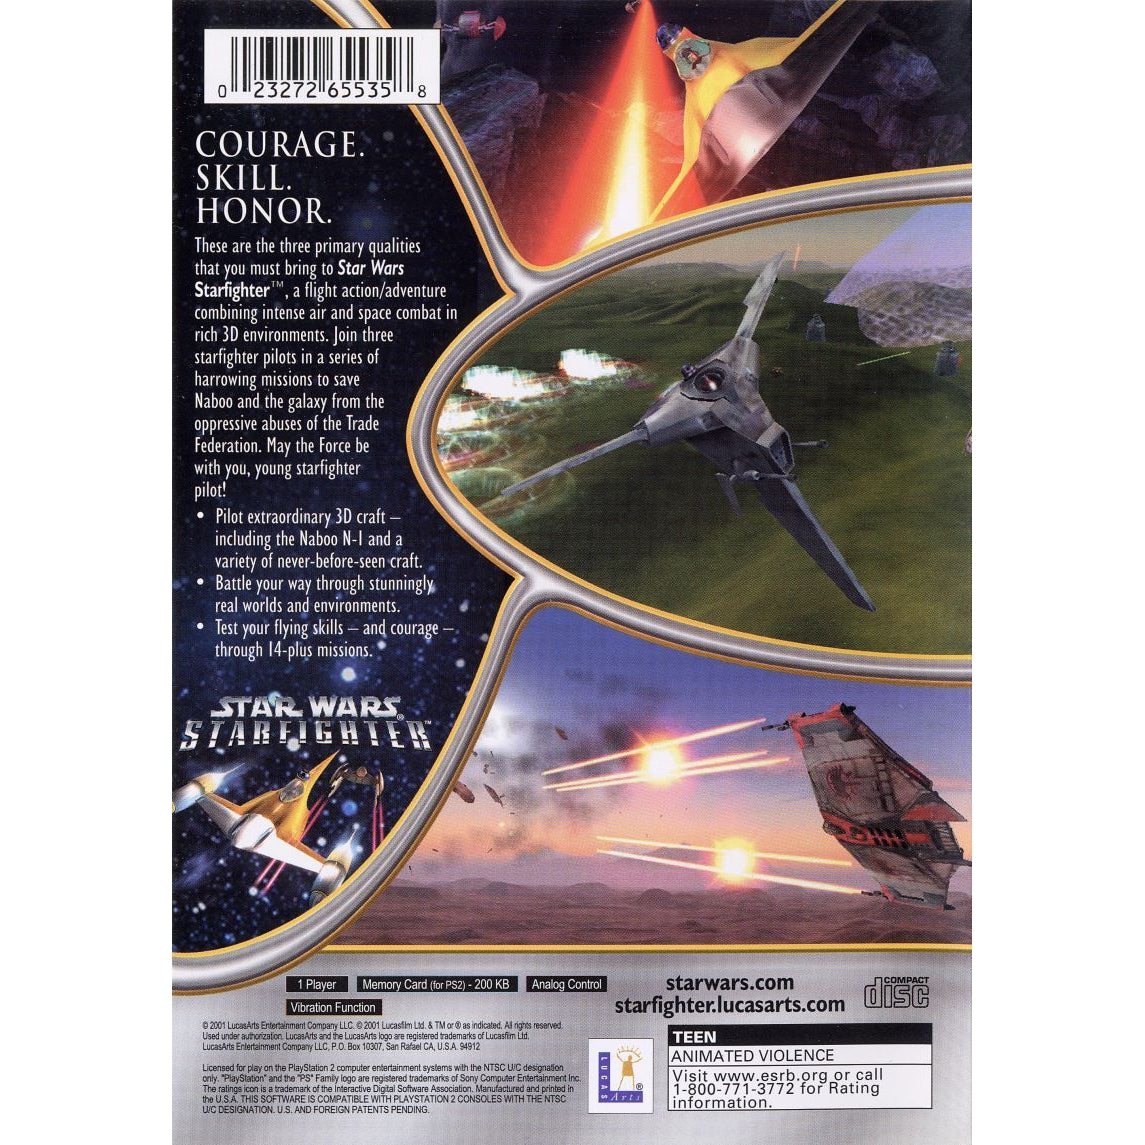 Star Wars: Starfighter (Greatest Hits) - PlayStation 2 (PS2) Game Complete - YourGamingShop.com - Buy, Sell, Trade Video Games Online. 120 Day Warranty. Satisfaction Guaranteed.